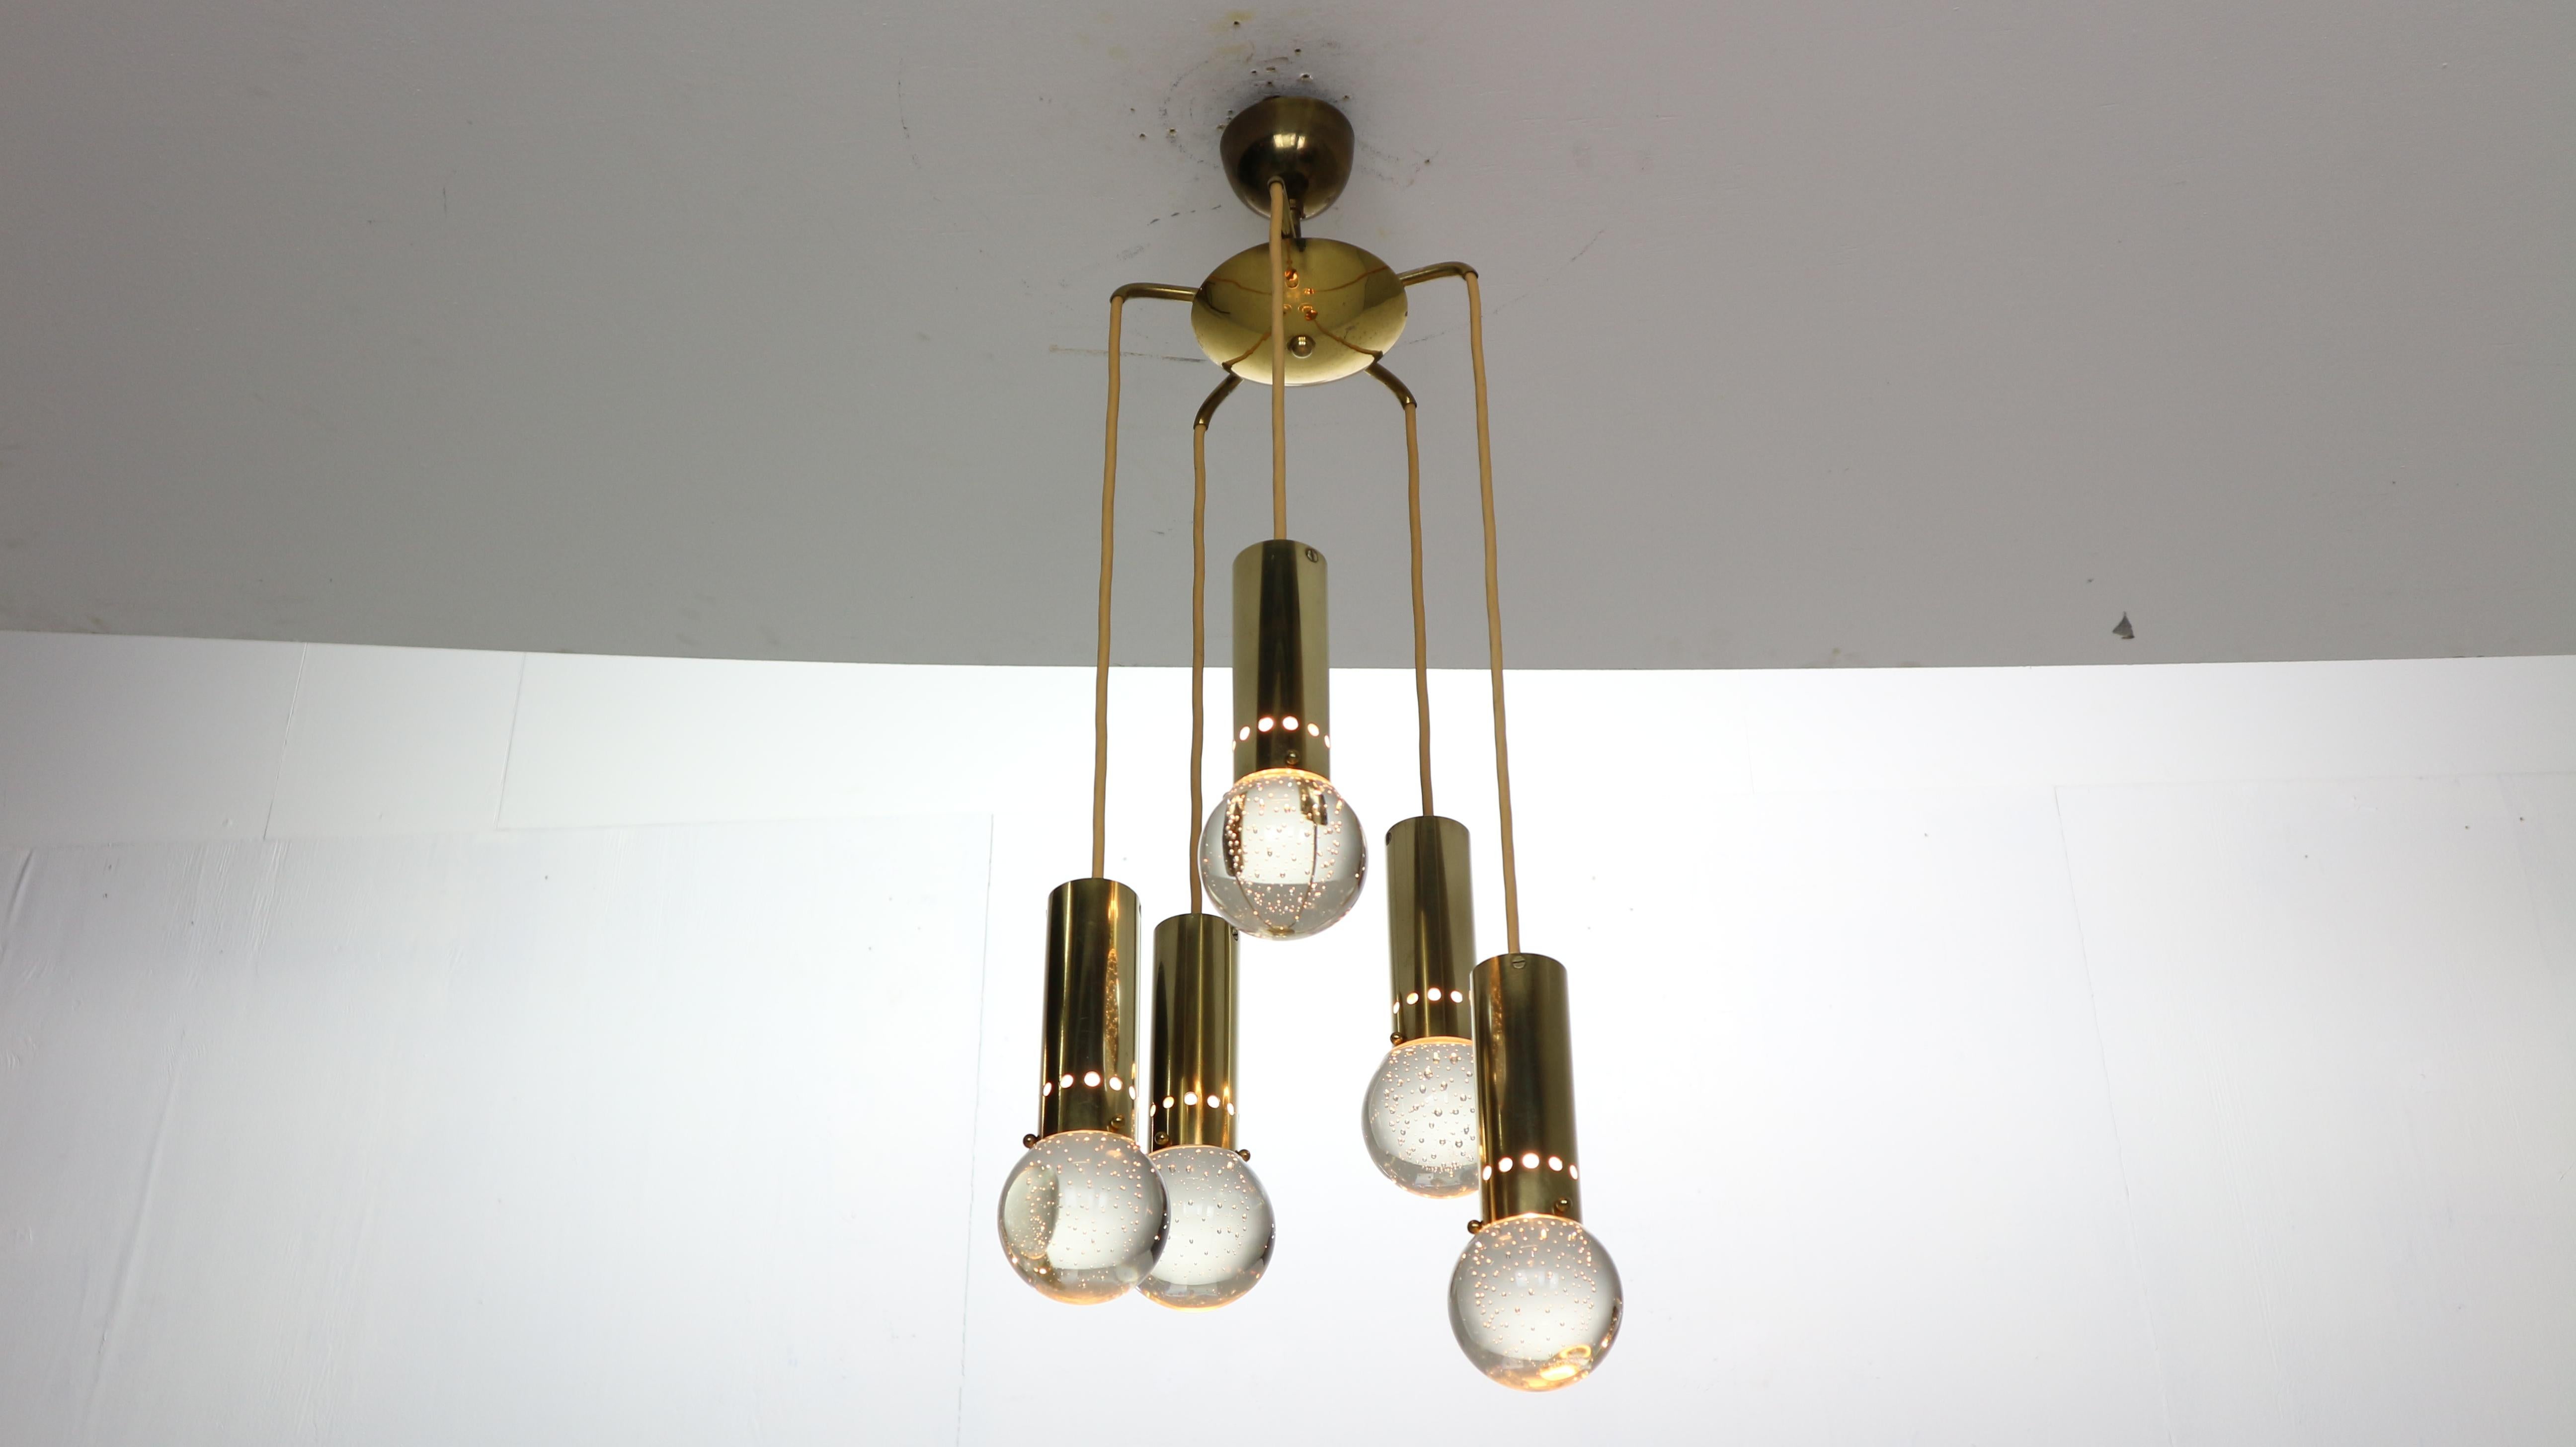 Rare beautiful pendant lamp by Gino Sarfatti for Arteluce, 1950s, Italy.
Model number: SP/ 16.

This special pendant lamp, has five heavy massive bubble glass, made by Archimede Seguso, original holder made of brass, five glass balls in perfect